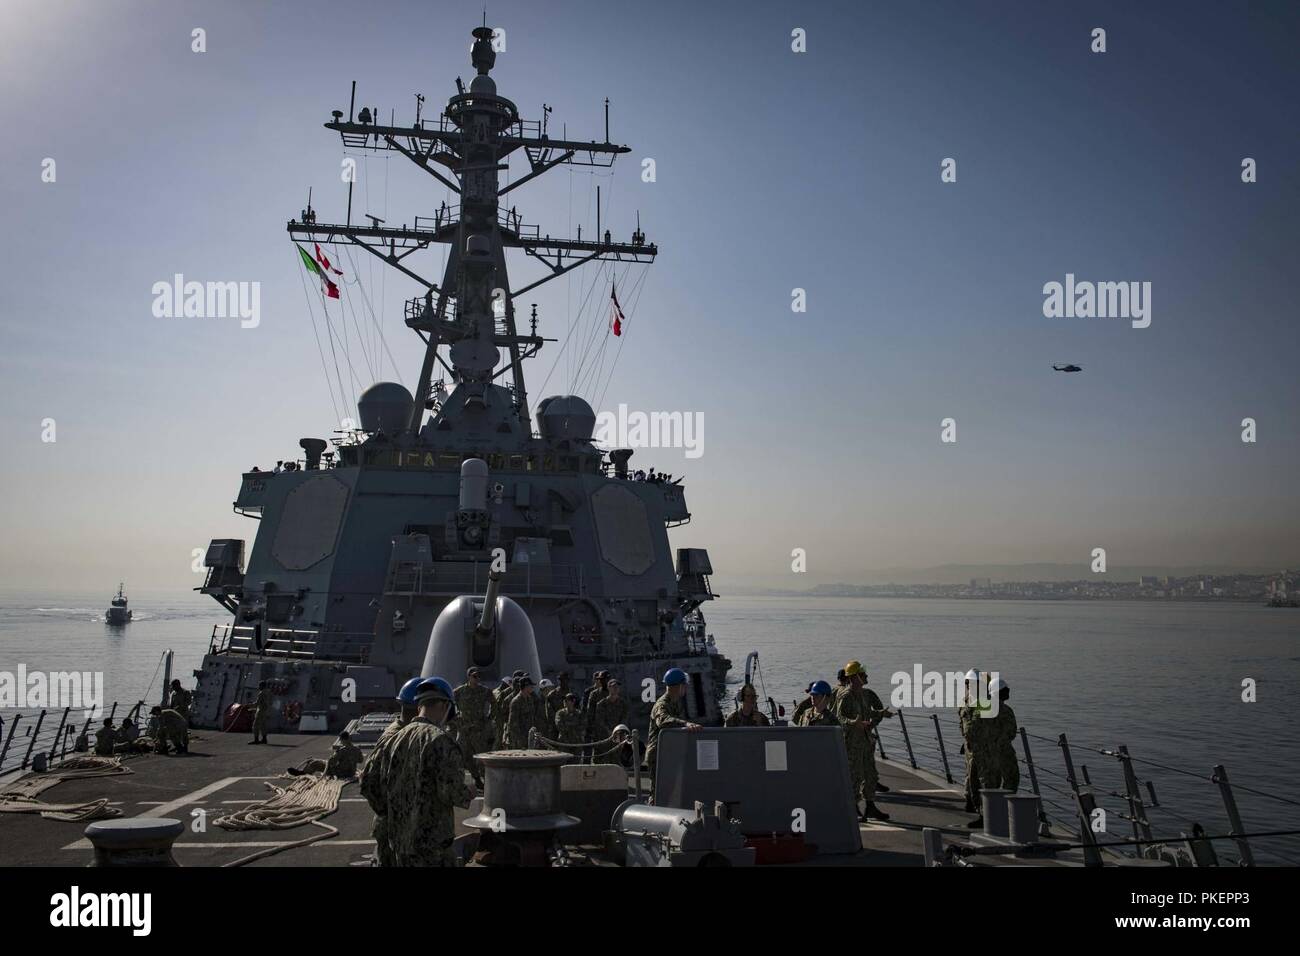 Algeria (July 29, 2018) The Arleigh Burke-class guided-missile destroyer USS Carney (DDG 64) arrives in Algiers, Algeria, for a scheduled port visit July 29, 2018. Carney, forward-deployed to Rota, Spain, is on its fifth patrol in the U.S. 6th Fleet area of operations in support of regional allies and partners as well as U.S. national security interests in Europe  and Africa. Stock Photo